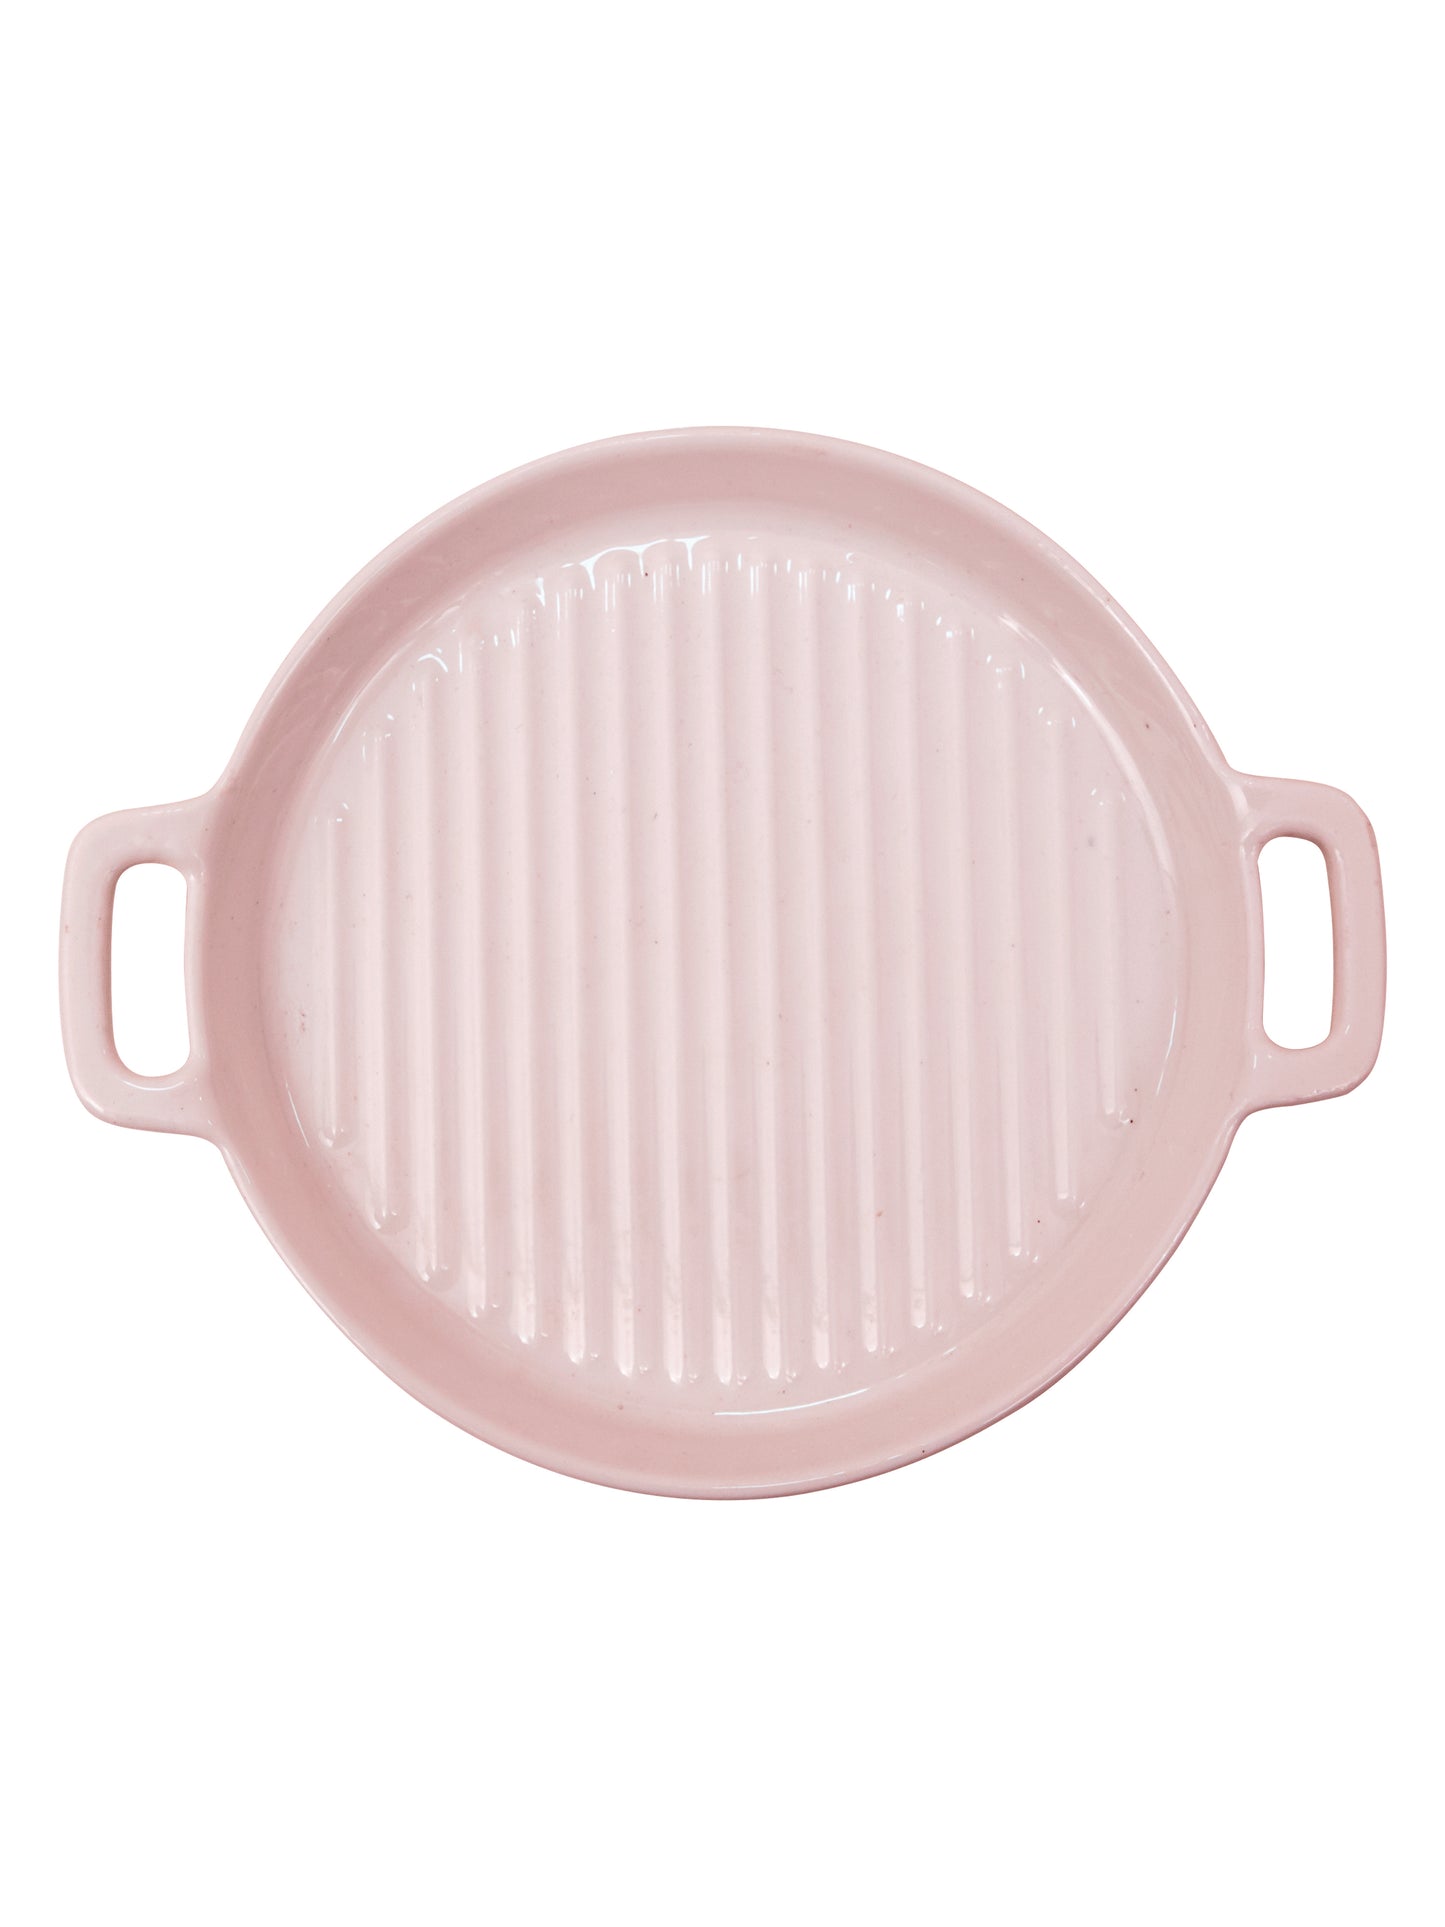 Ceramic Round with Handle Grill Plates for Serving, Pink